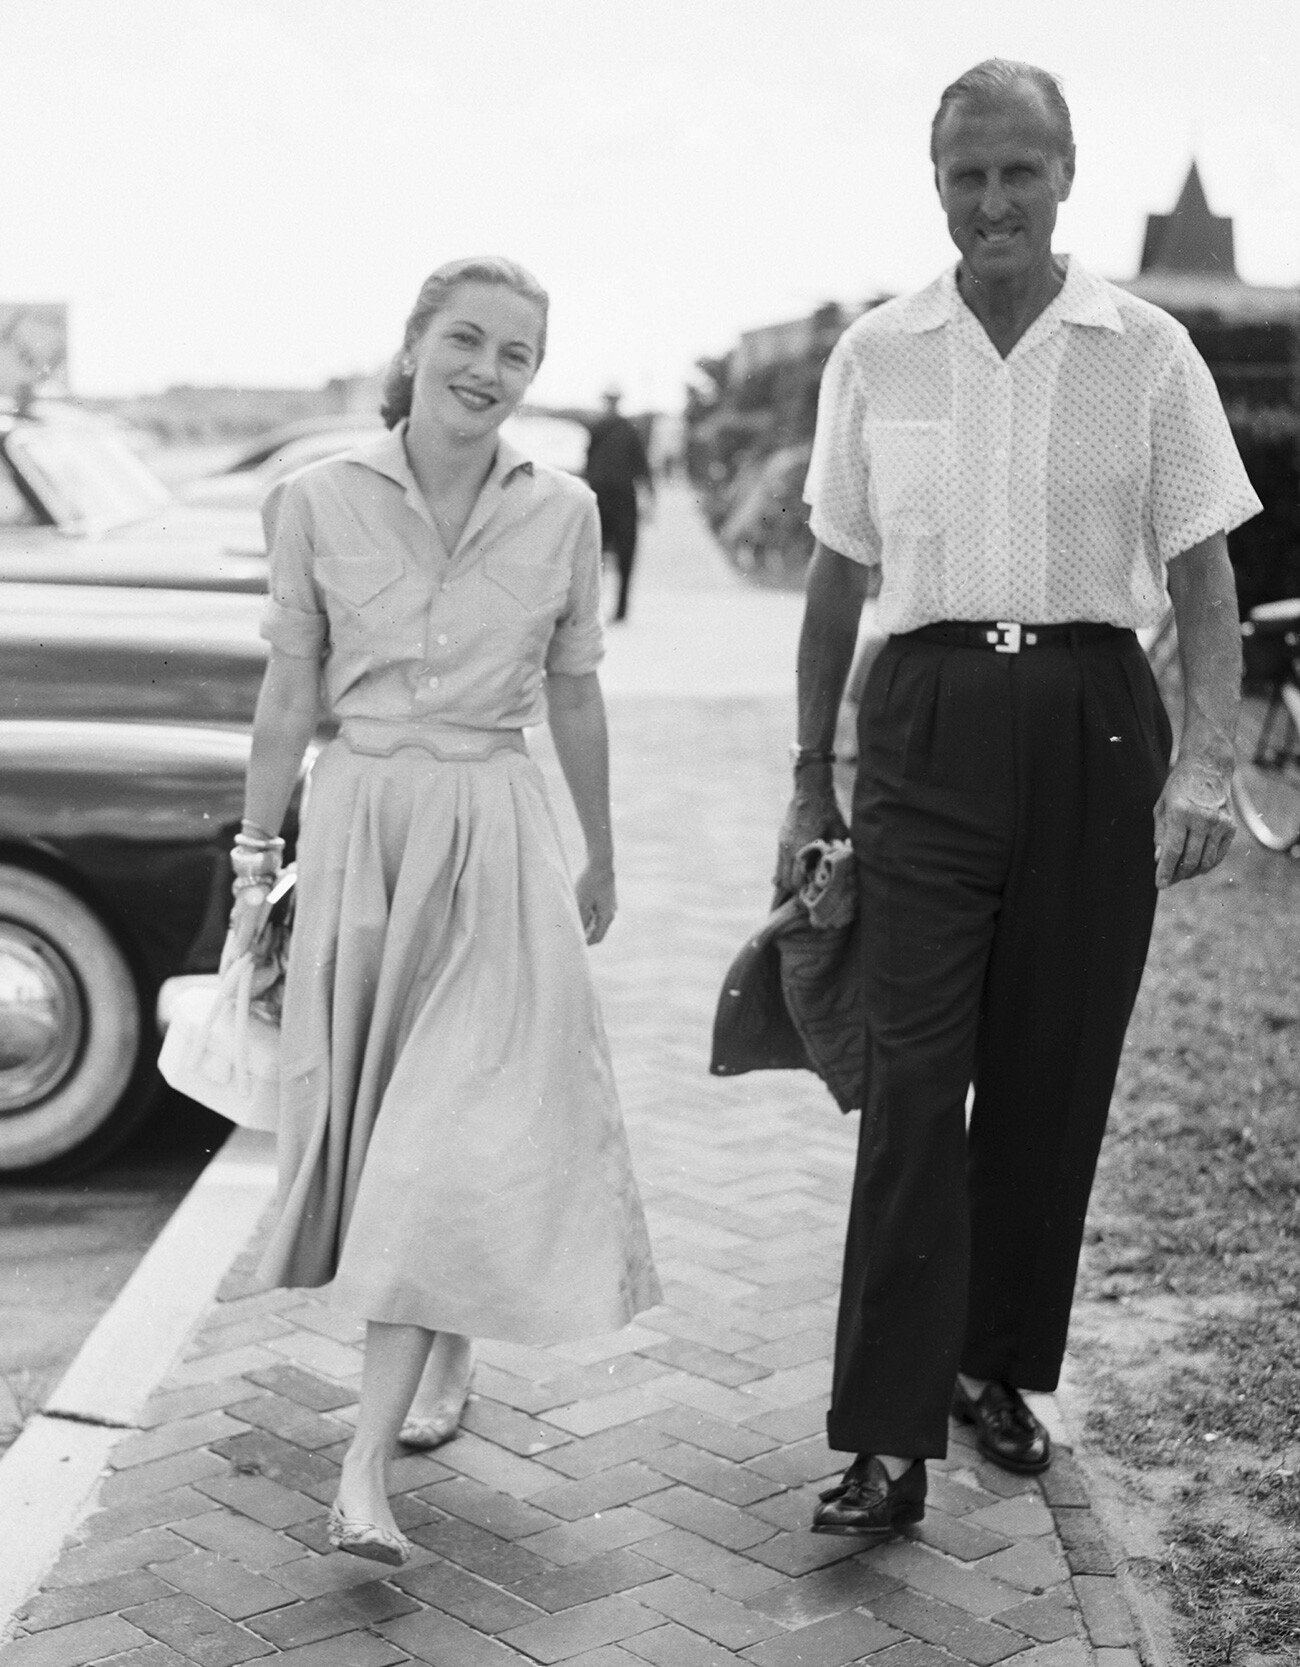 Col Serge Obolensky And Actress Joan Fontaine Arrive At The Southampton Beach Club In Southampton, L.I.,Ca 1950.